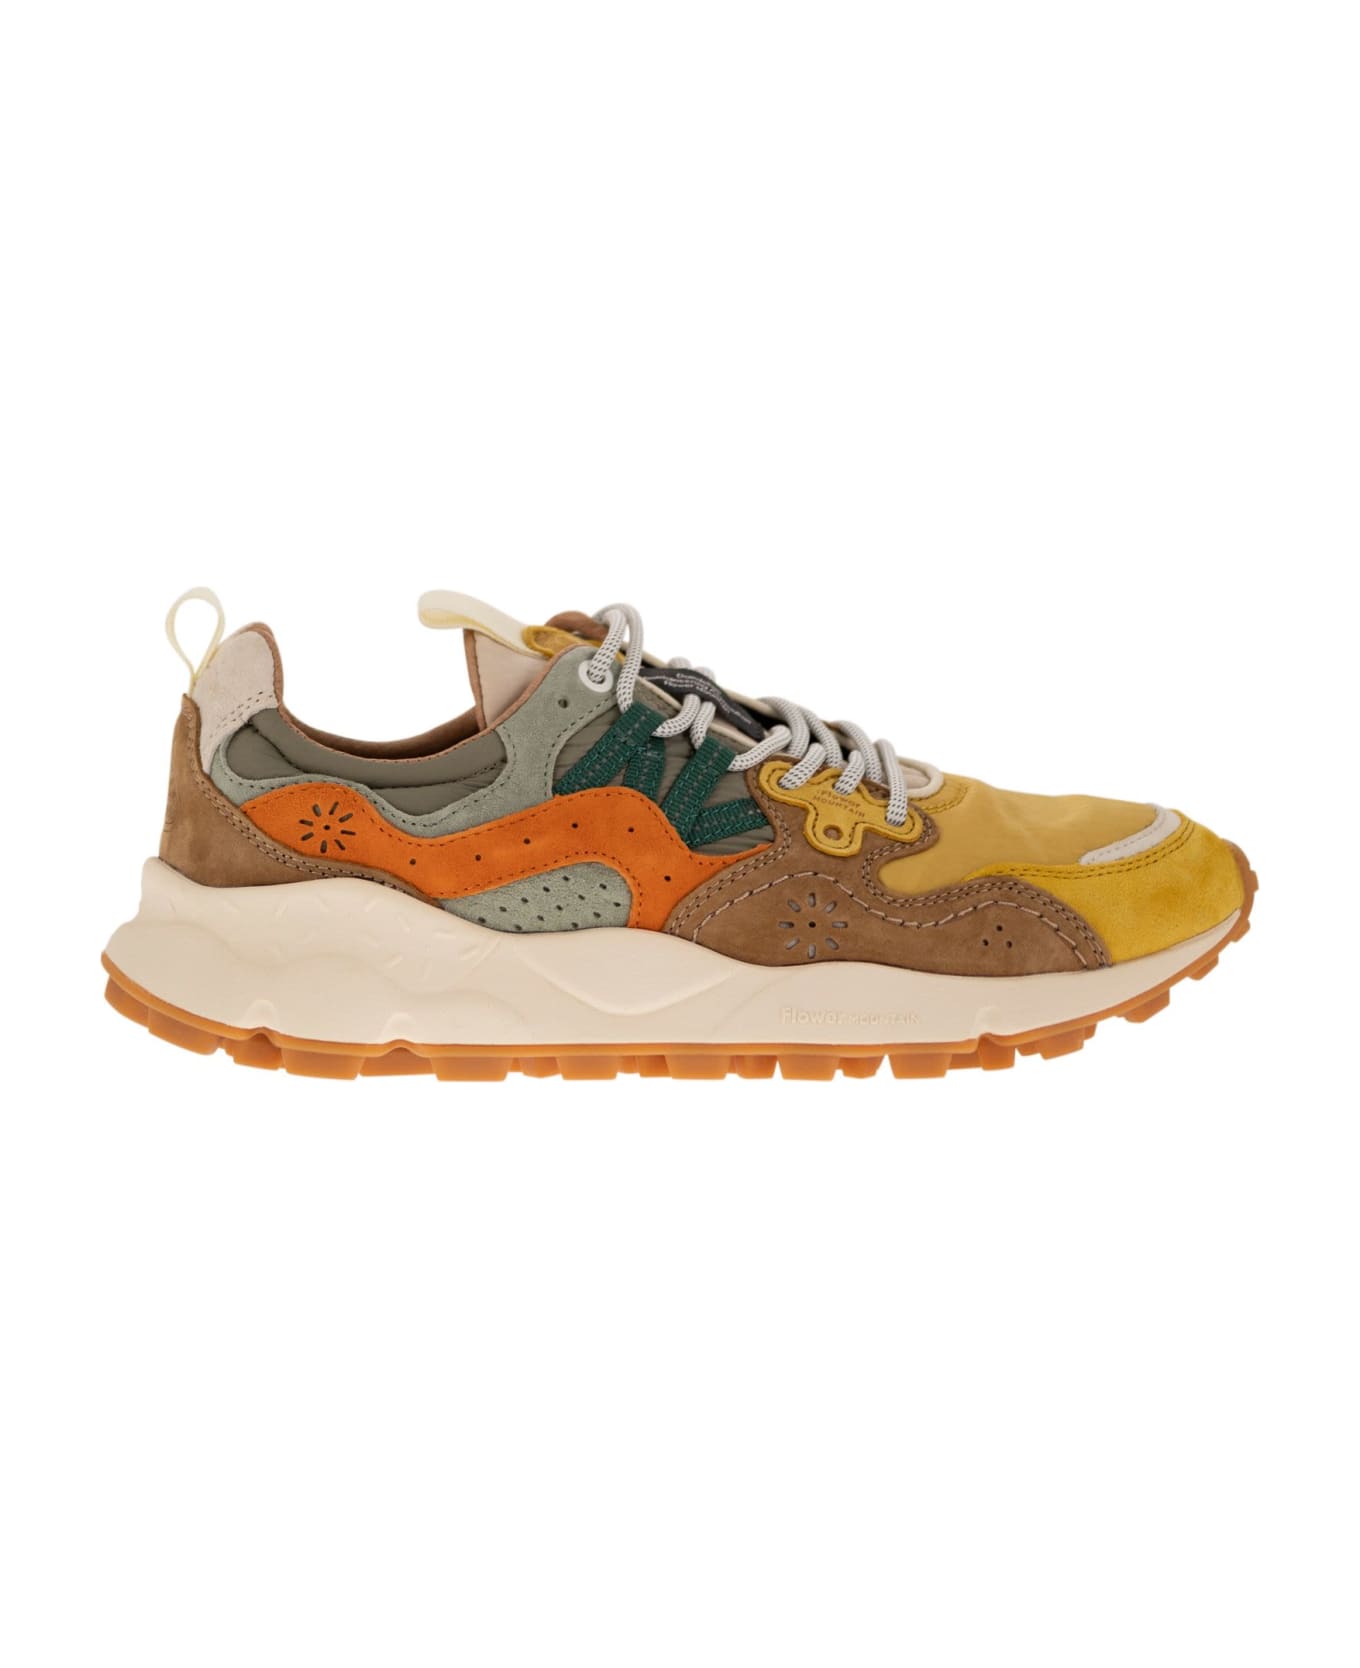 Flower Mountain Yamano 3 - Sneakers In Suede And Technical Fabric - Orange